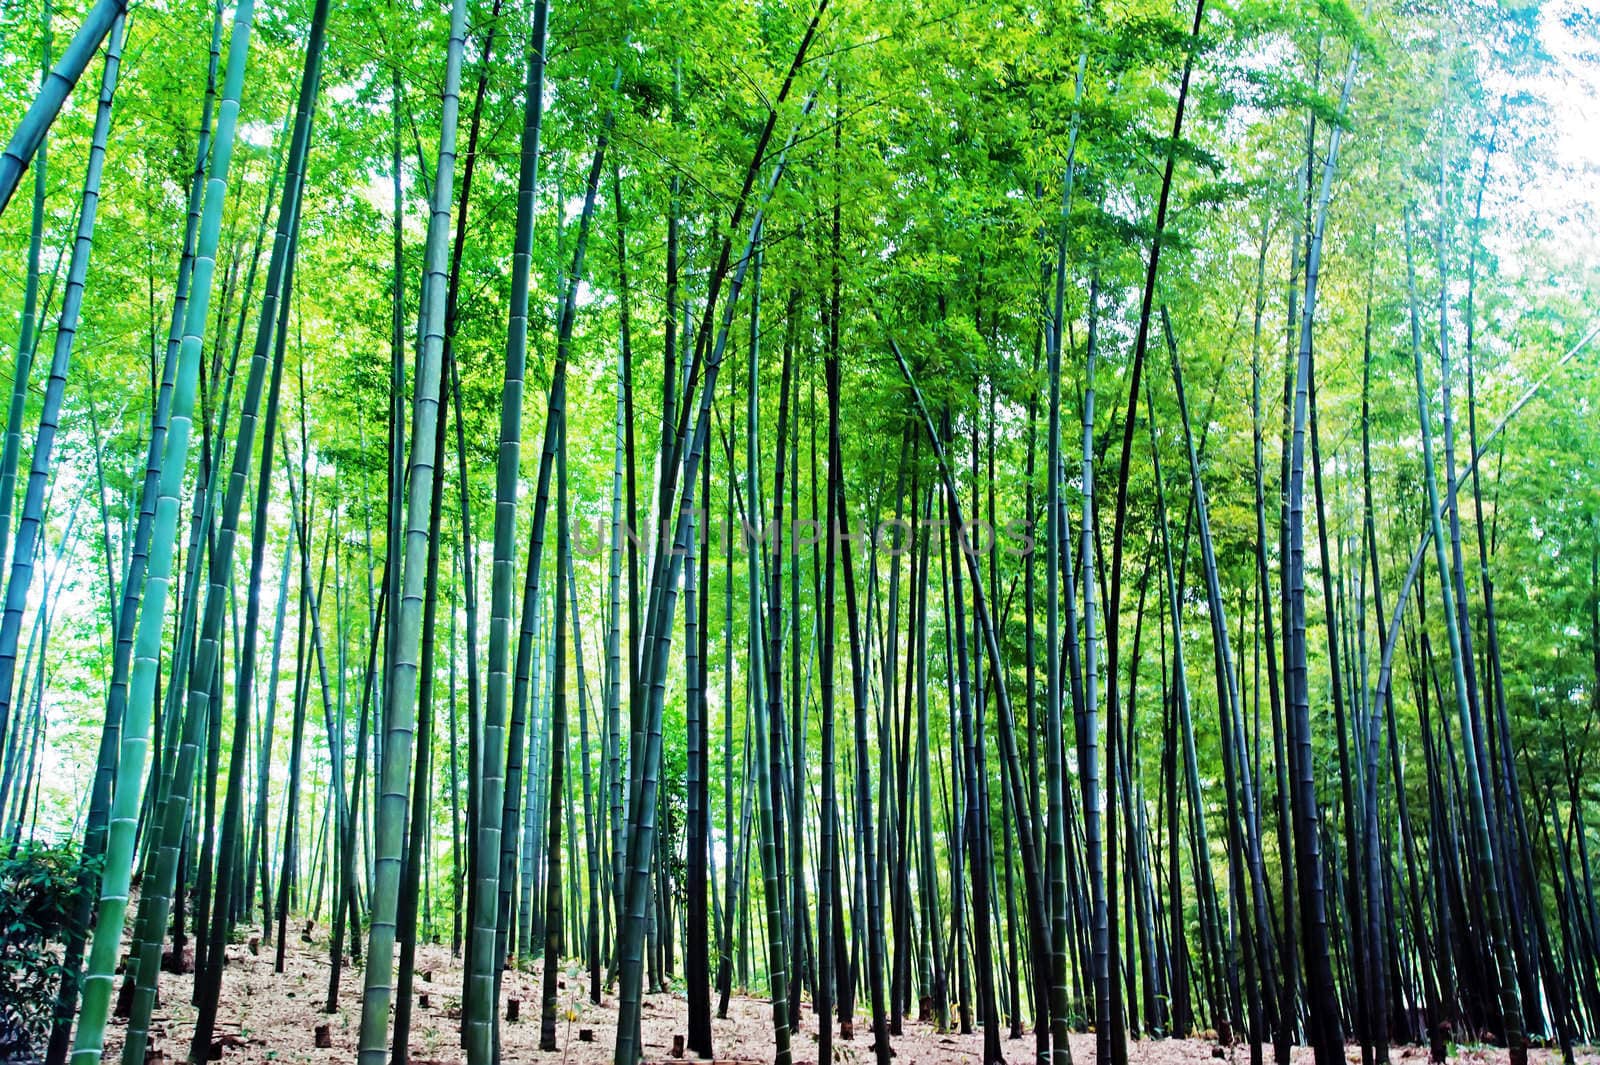 landscape of Bamboo forest in Sichuan Bamboo Sea  - taken in Sichuan, China by xfdly5